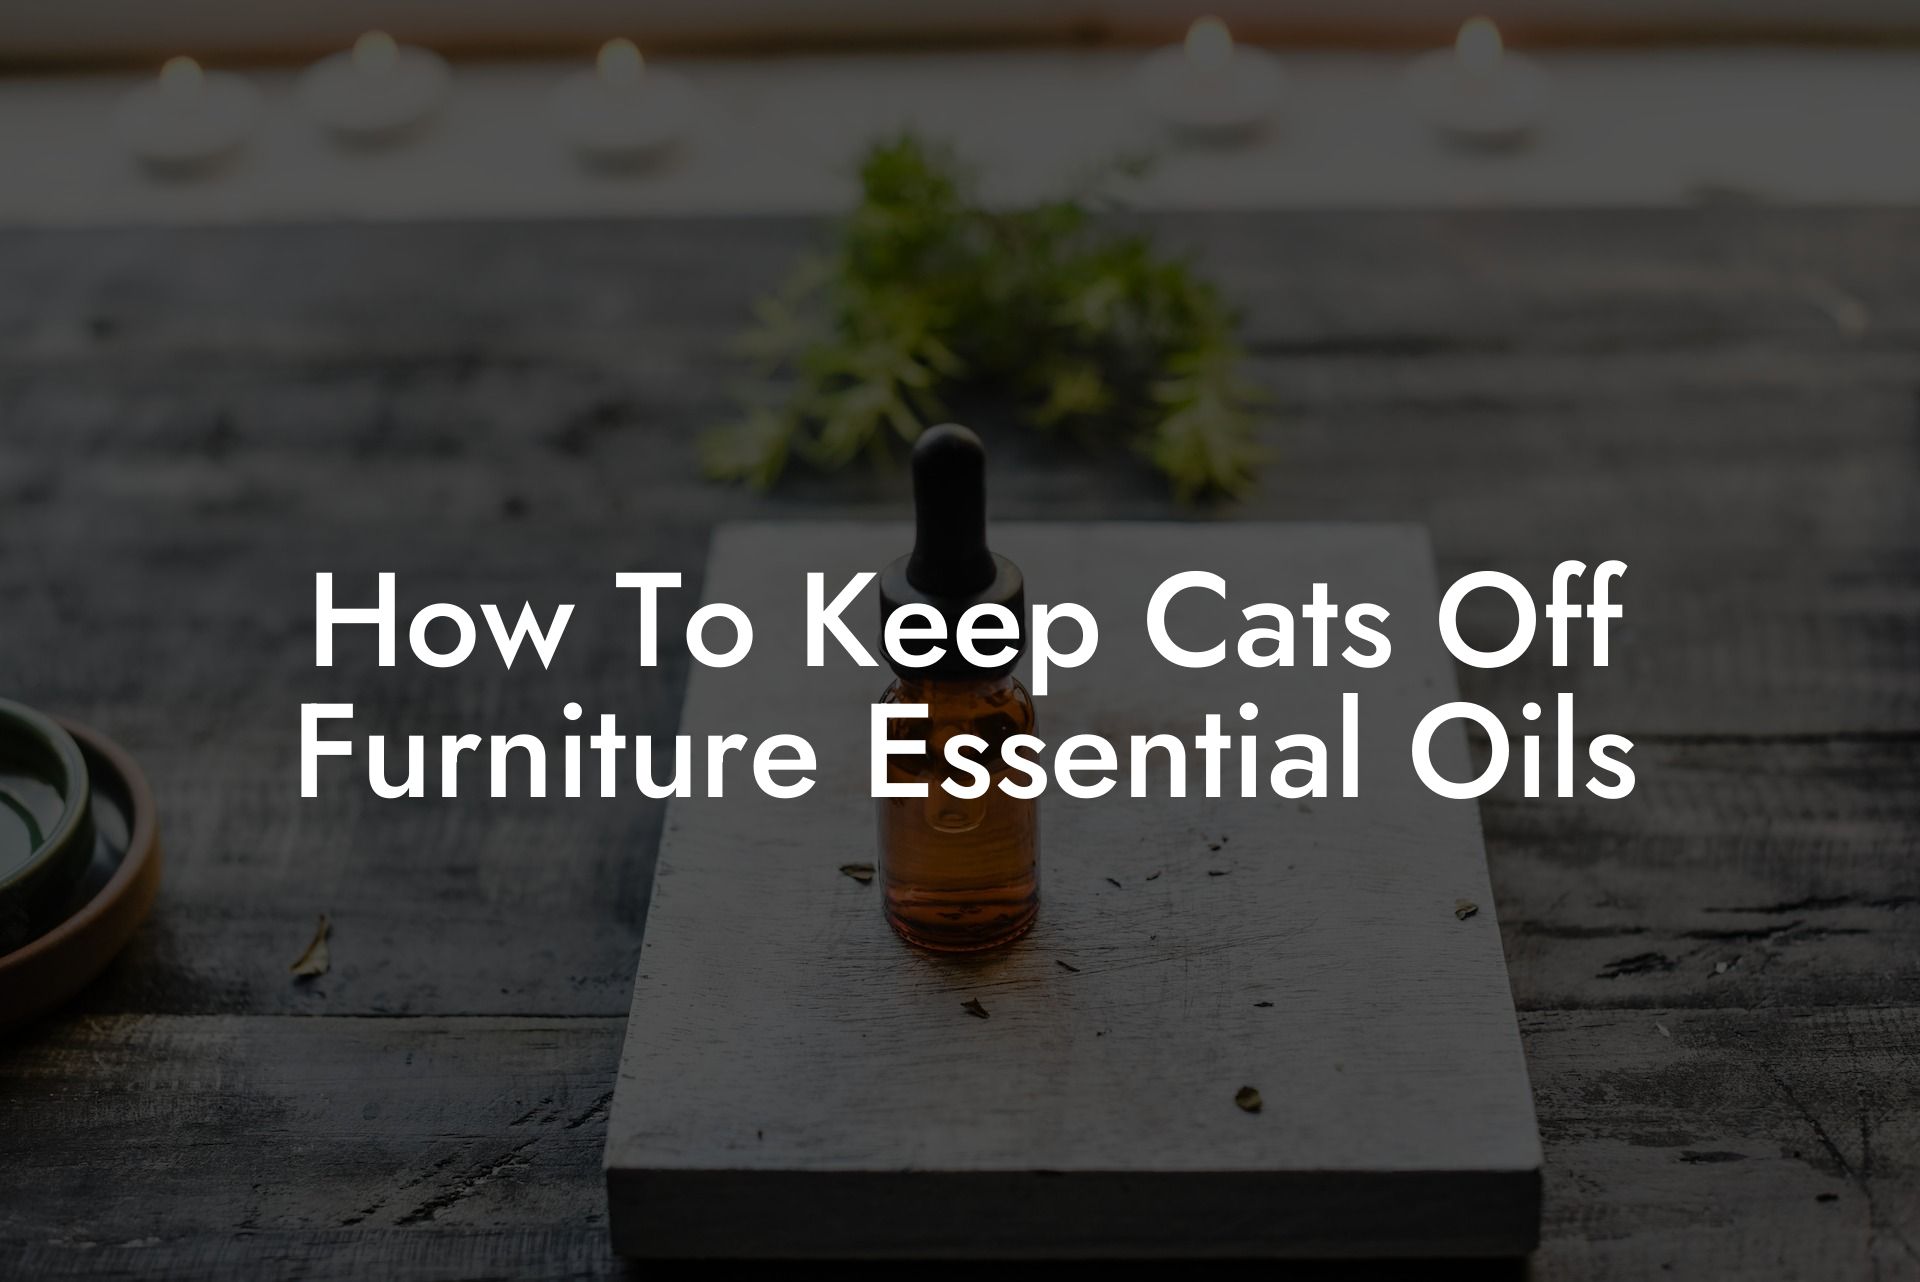 How To Keep Cats Off Furniture Essential Oils